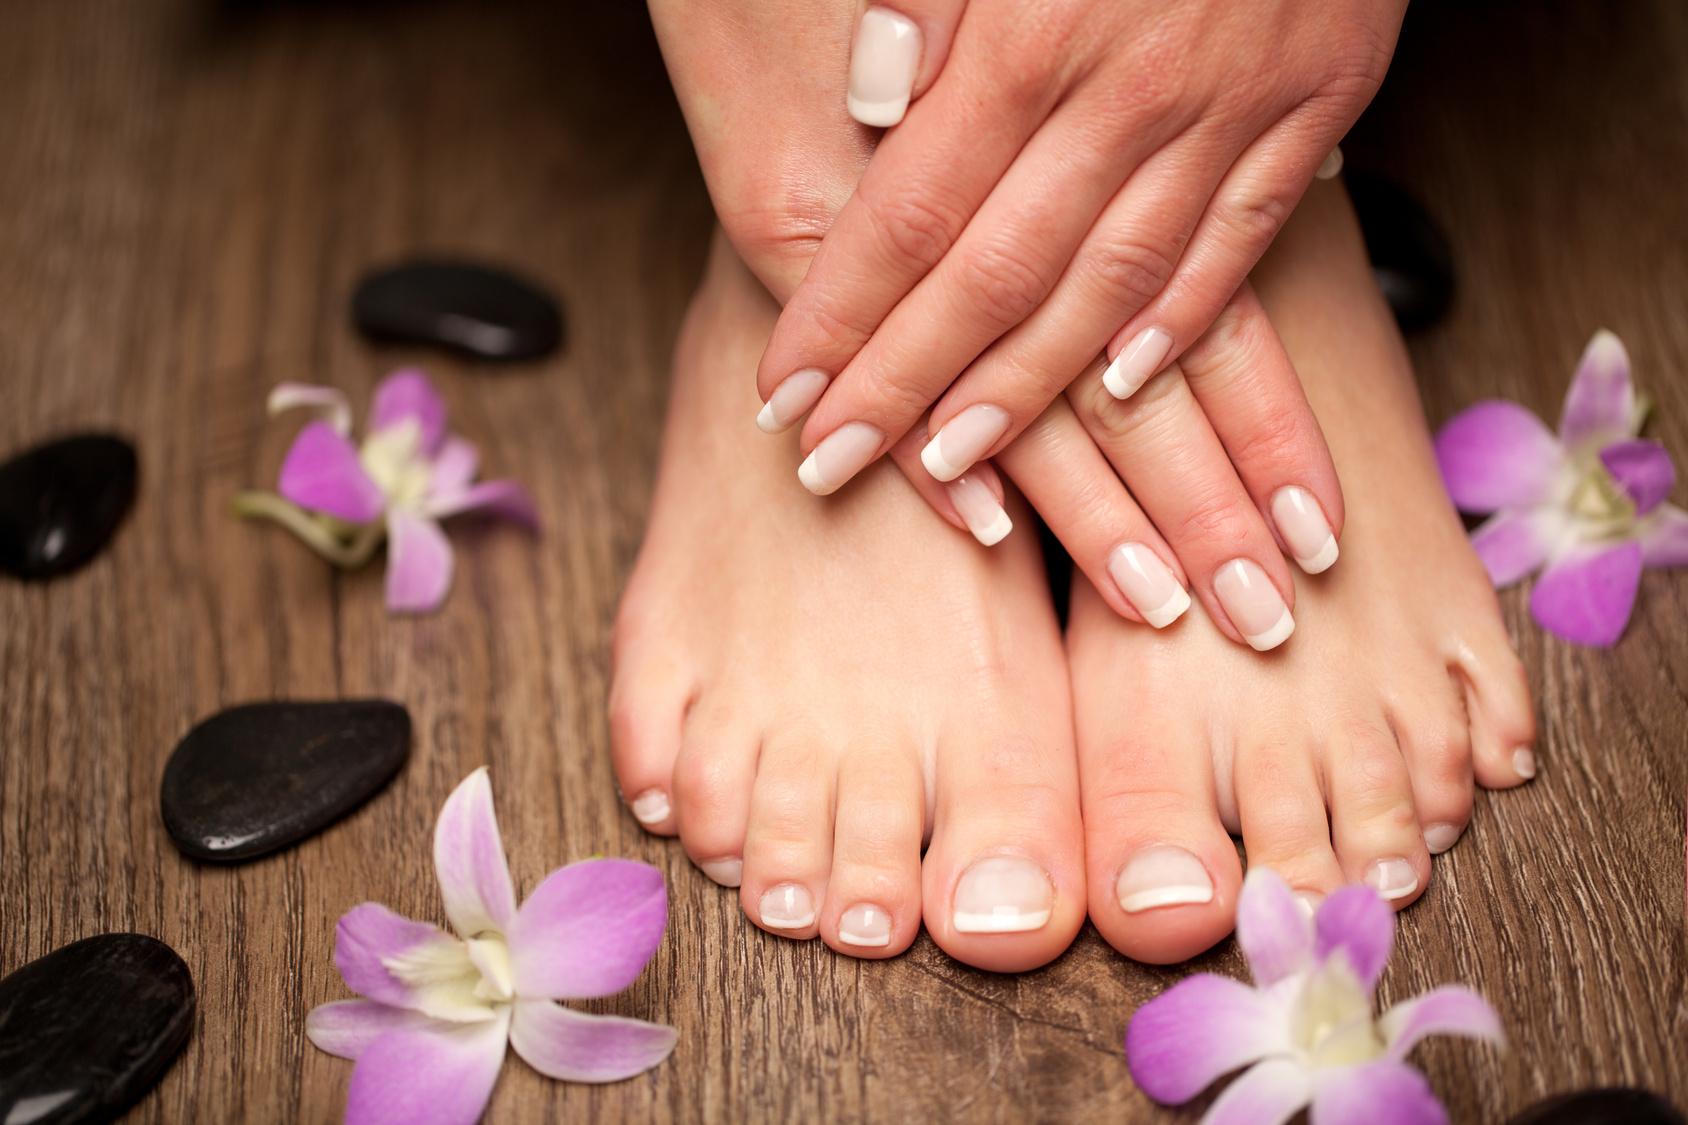 7. Top-Rated Nail Salons in Colorado for a Perfect Pedicure - wide 8